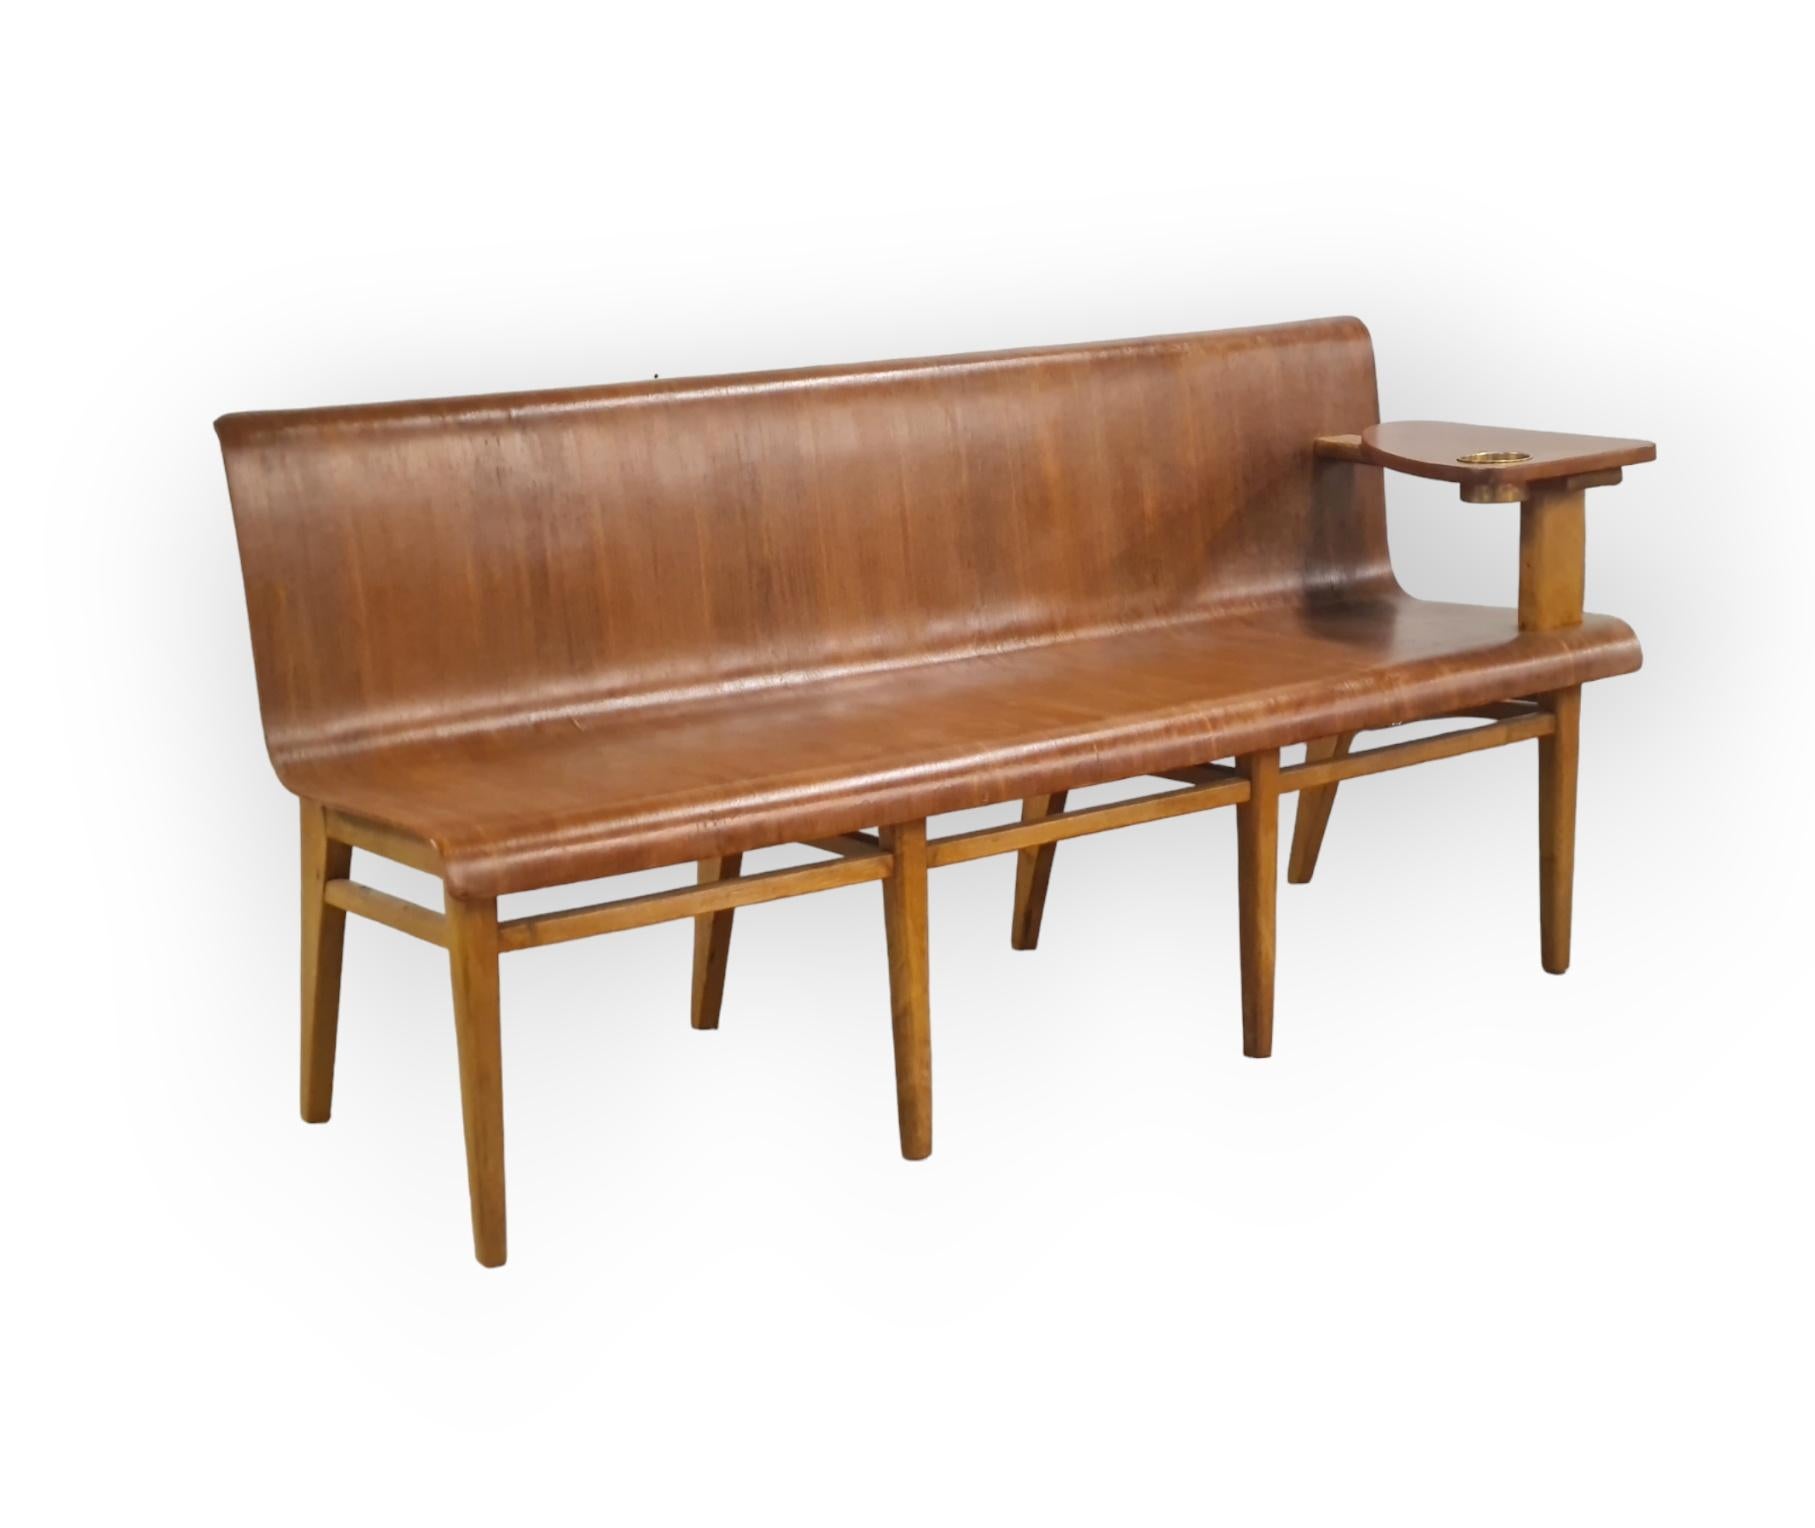 An exceptionally rare bench by Finnish Architect Risto Veikko Luukkonen (1902-1972) who was one of the pioneer functionalist architects to lead the movement in Finland. His career started in the 1920s and spaned till the late 1960s.
The bench is